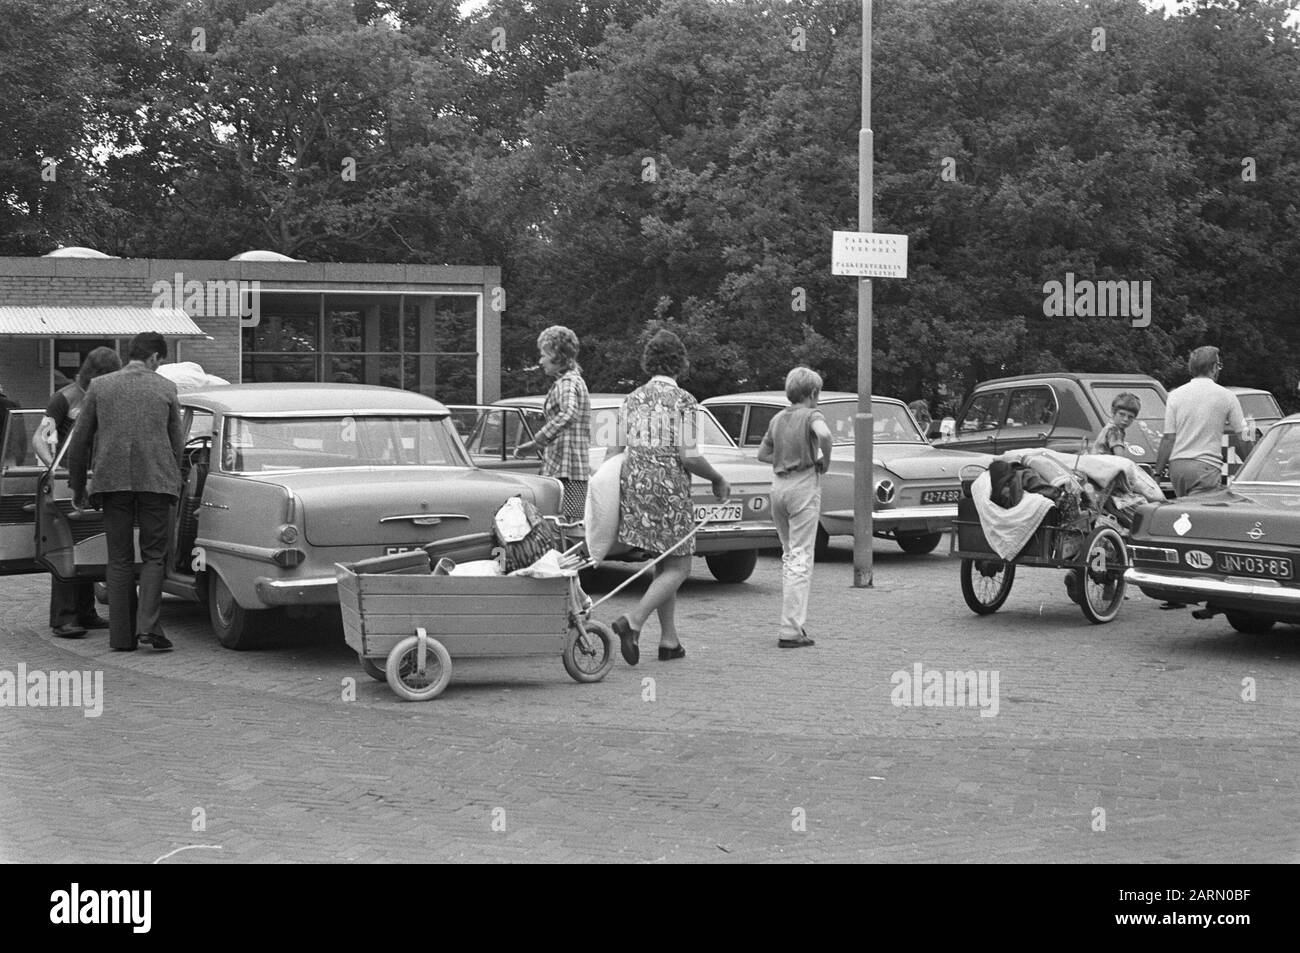 First day of summer holidays for many Dutch people  Holidaymakers at a campsite in Bakkum, Noord-Holland Date: 30 June 1972 Location: Bakkum, Castricum, Noord-Holland Keywords: handcarts Stock Photo